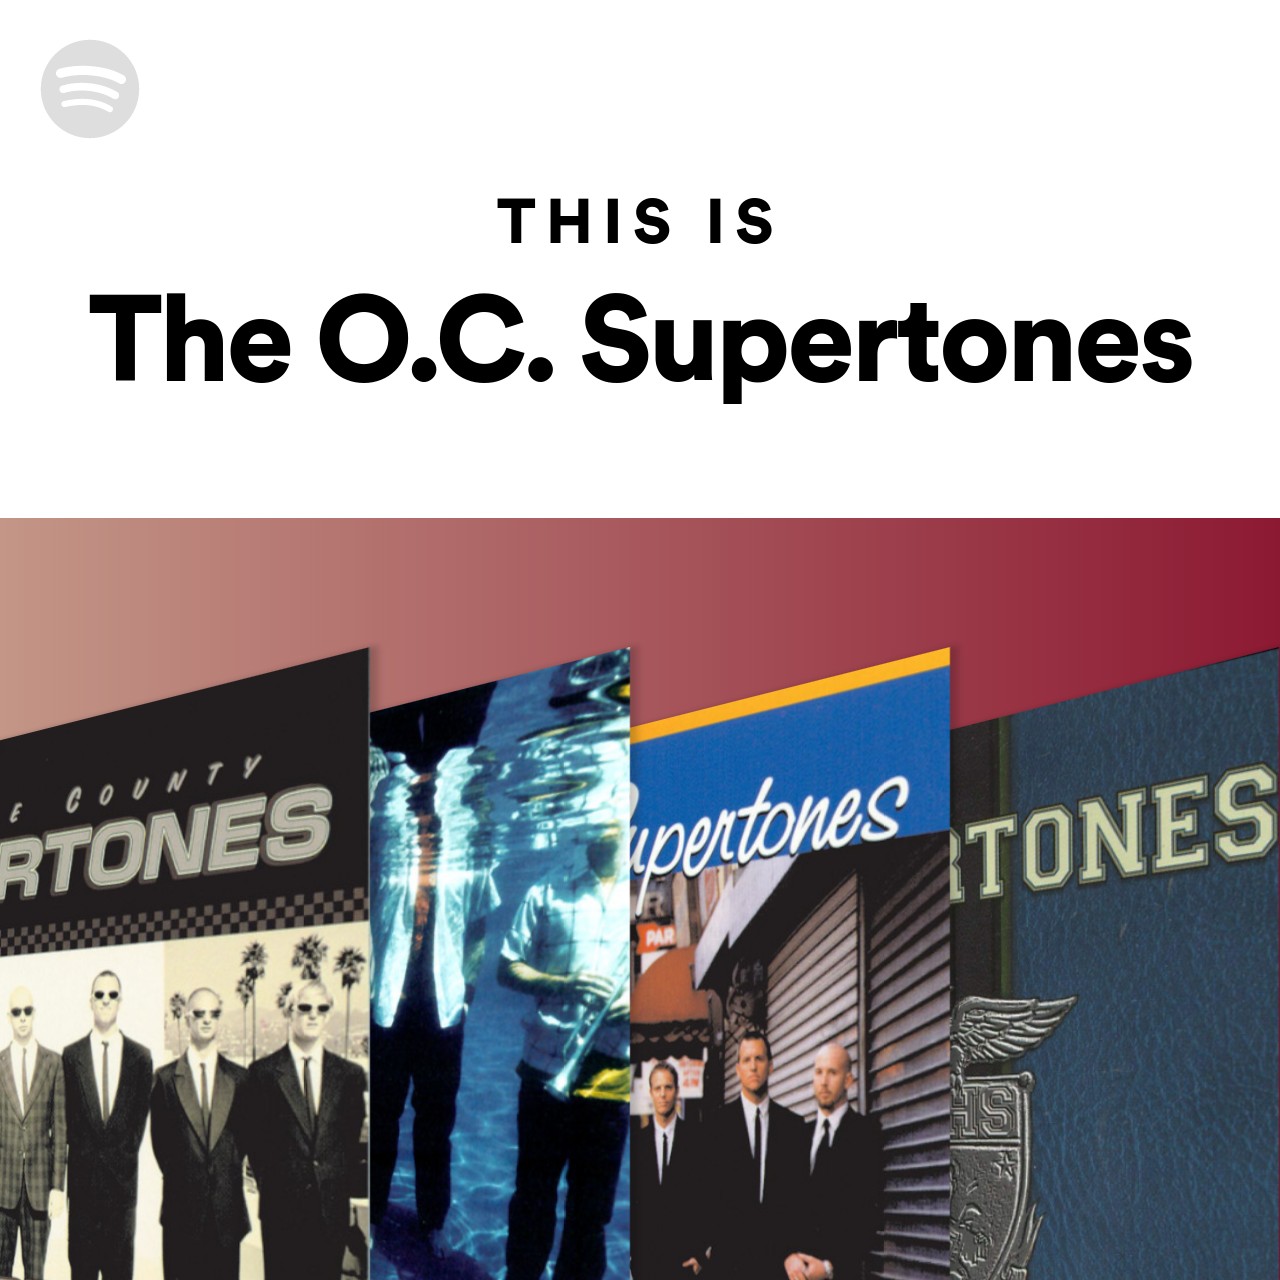 This Is The O.C. Supertones